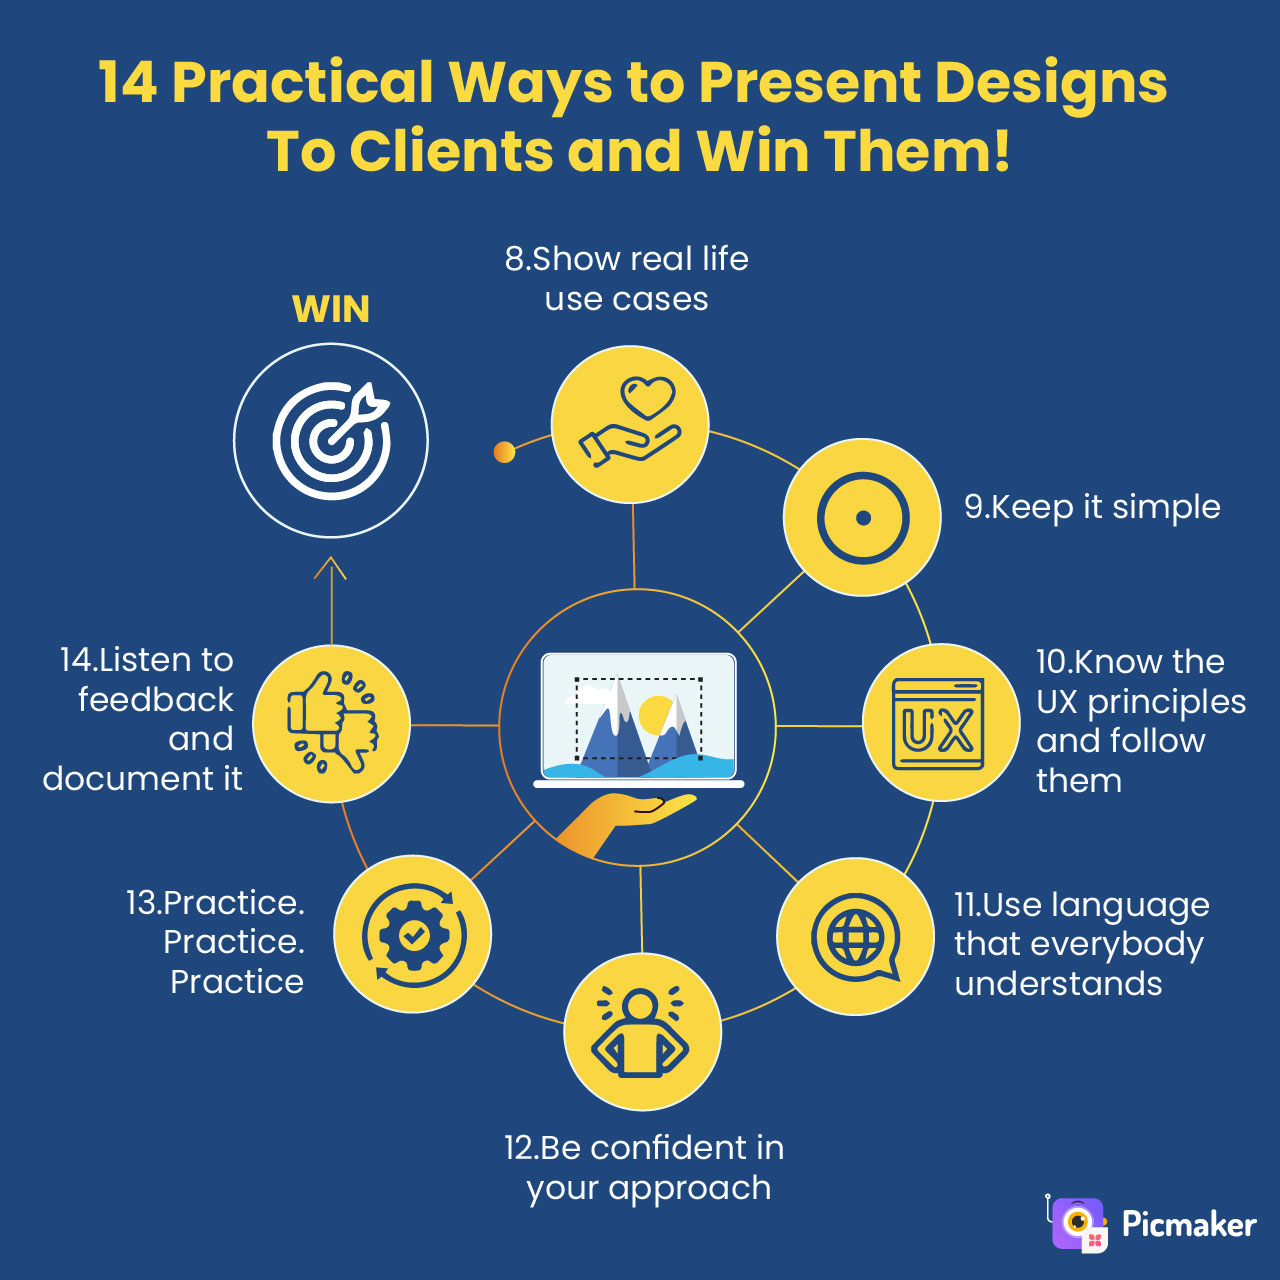 How to present design ideas and Design Concepts and win clients - 2 - Picmaker